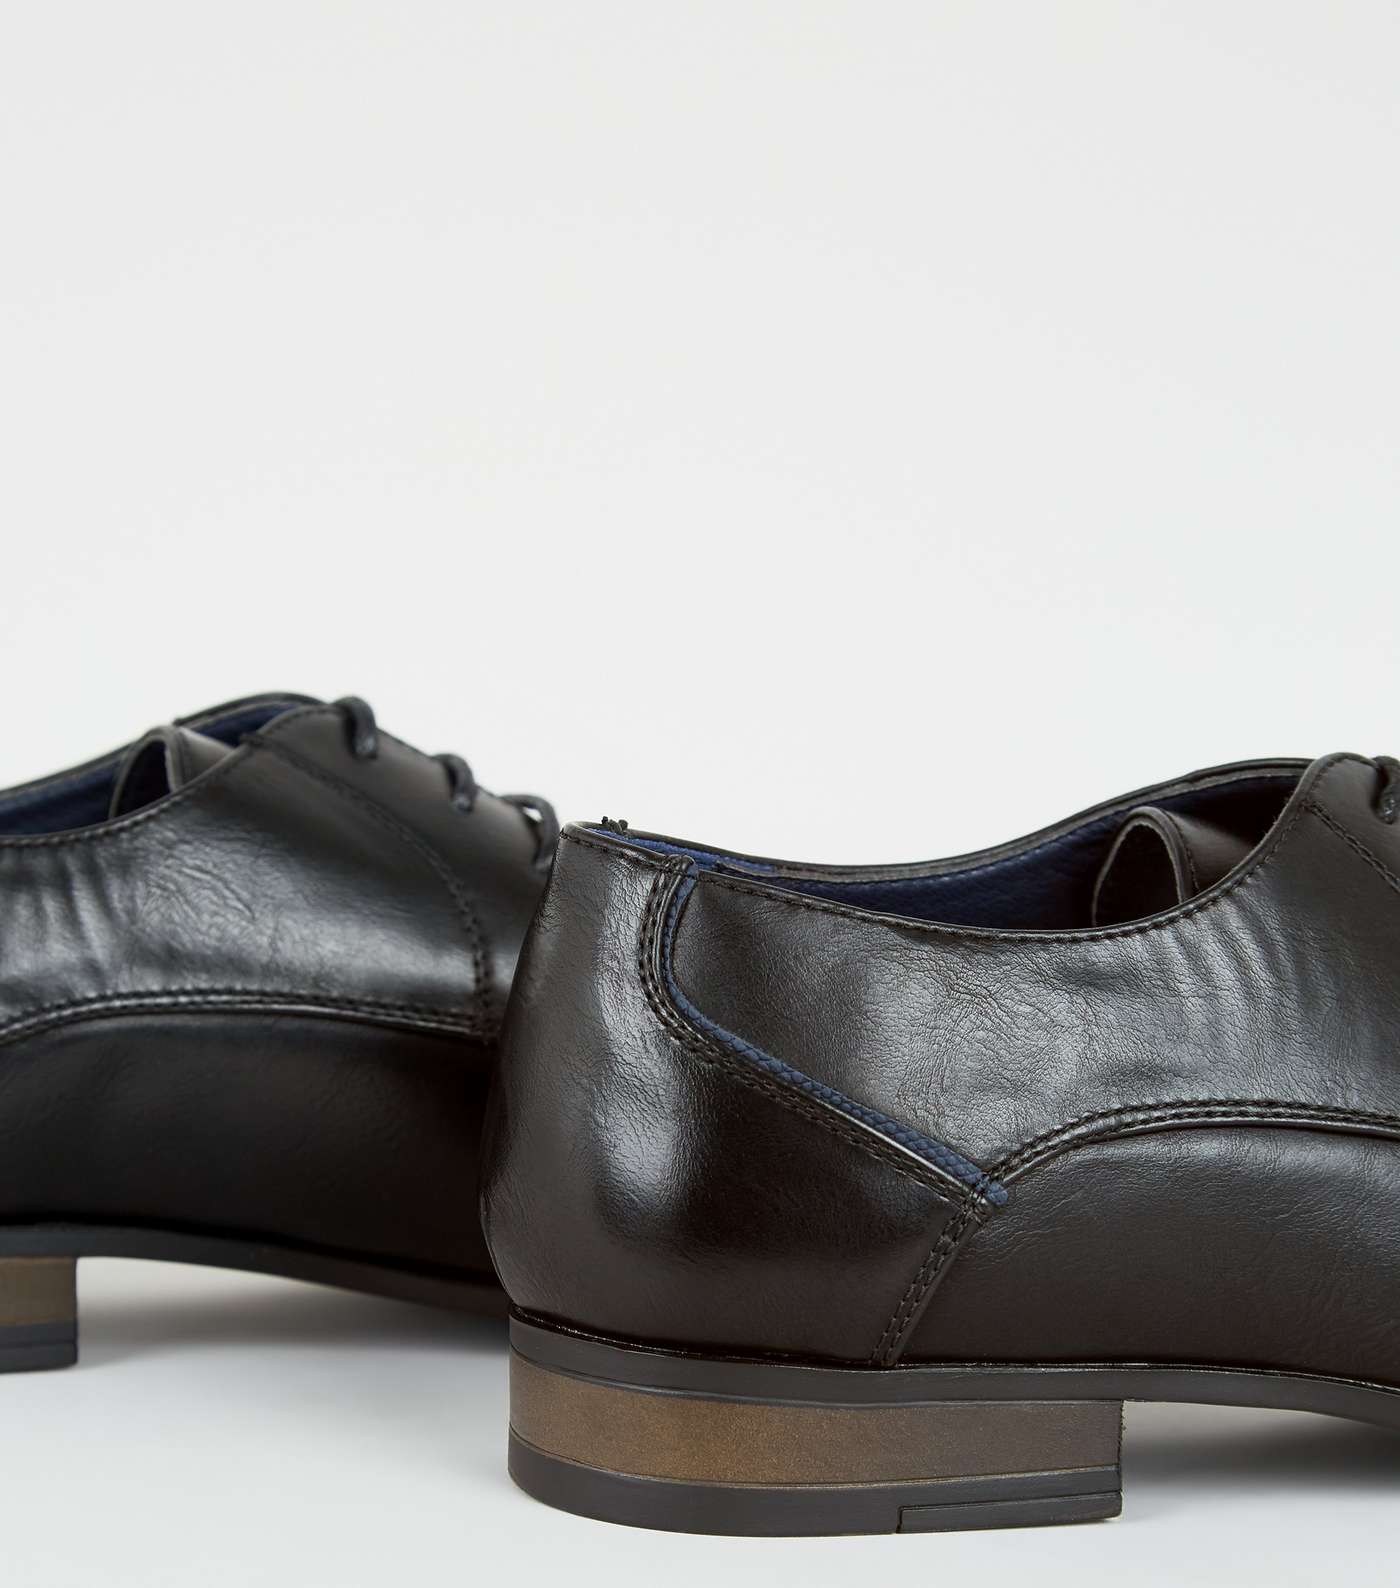 Black Leather-Look Lace Up Formal Shoes Image 4